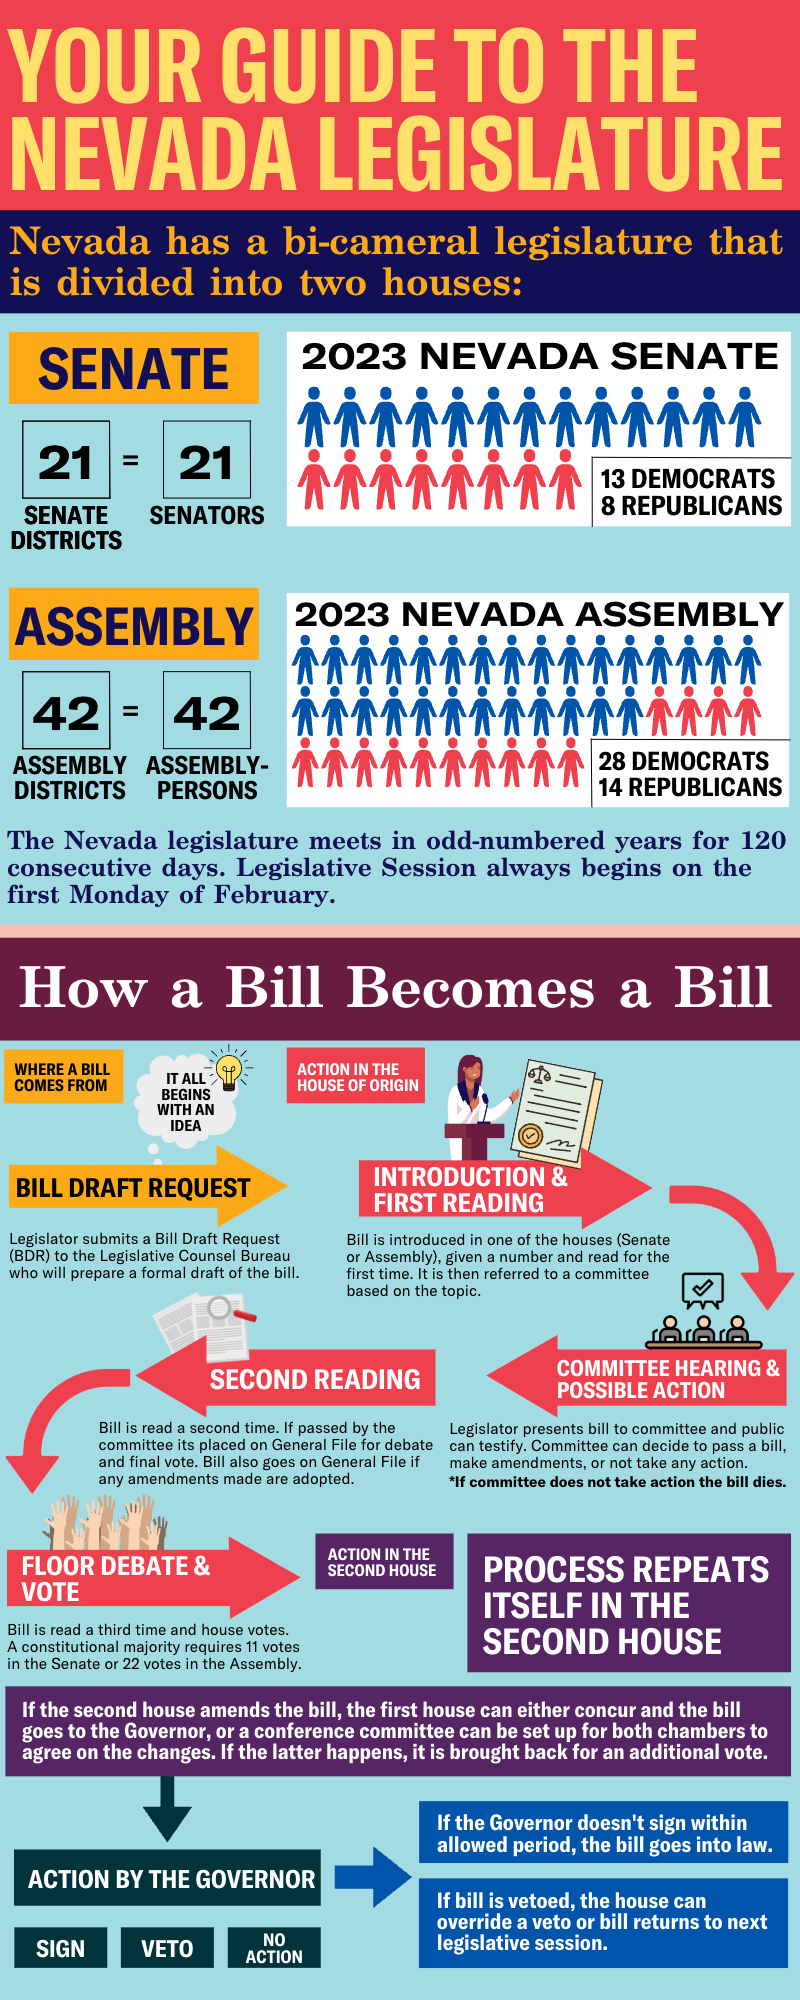 An infographic about the Nevada Legislature and the legislative process.